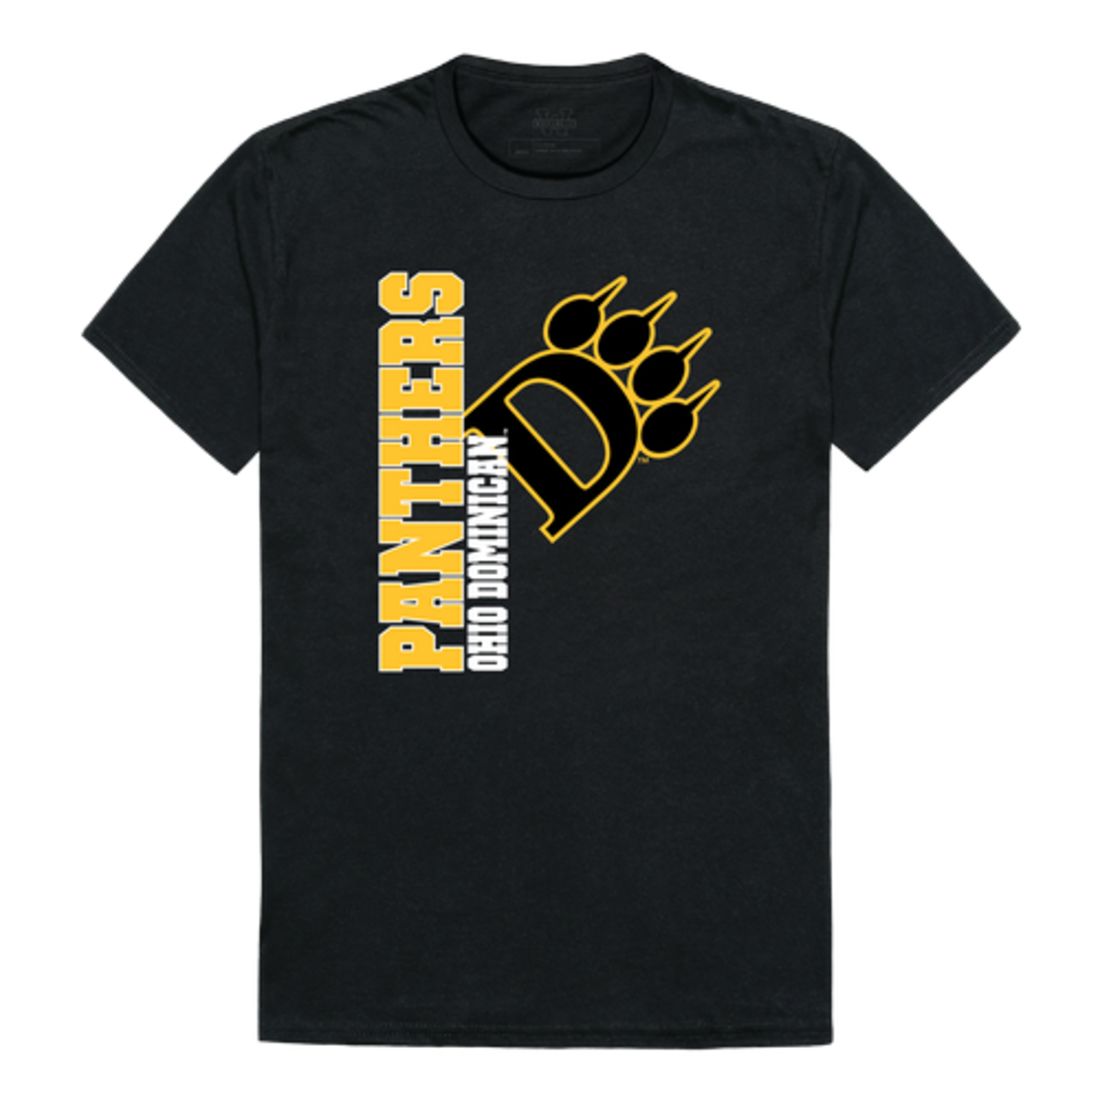 Ohio Dominican University Panthers Ghost T-Shirt Tee